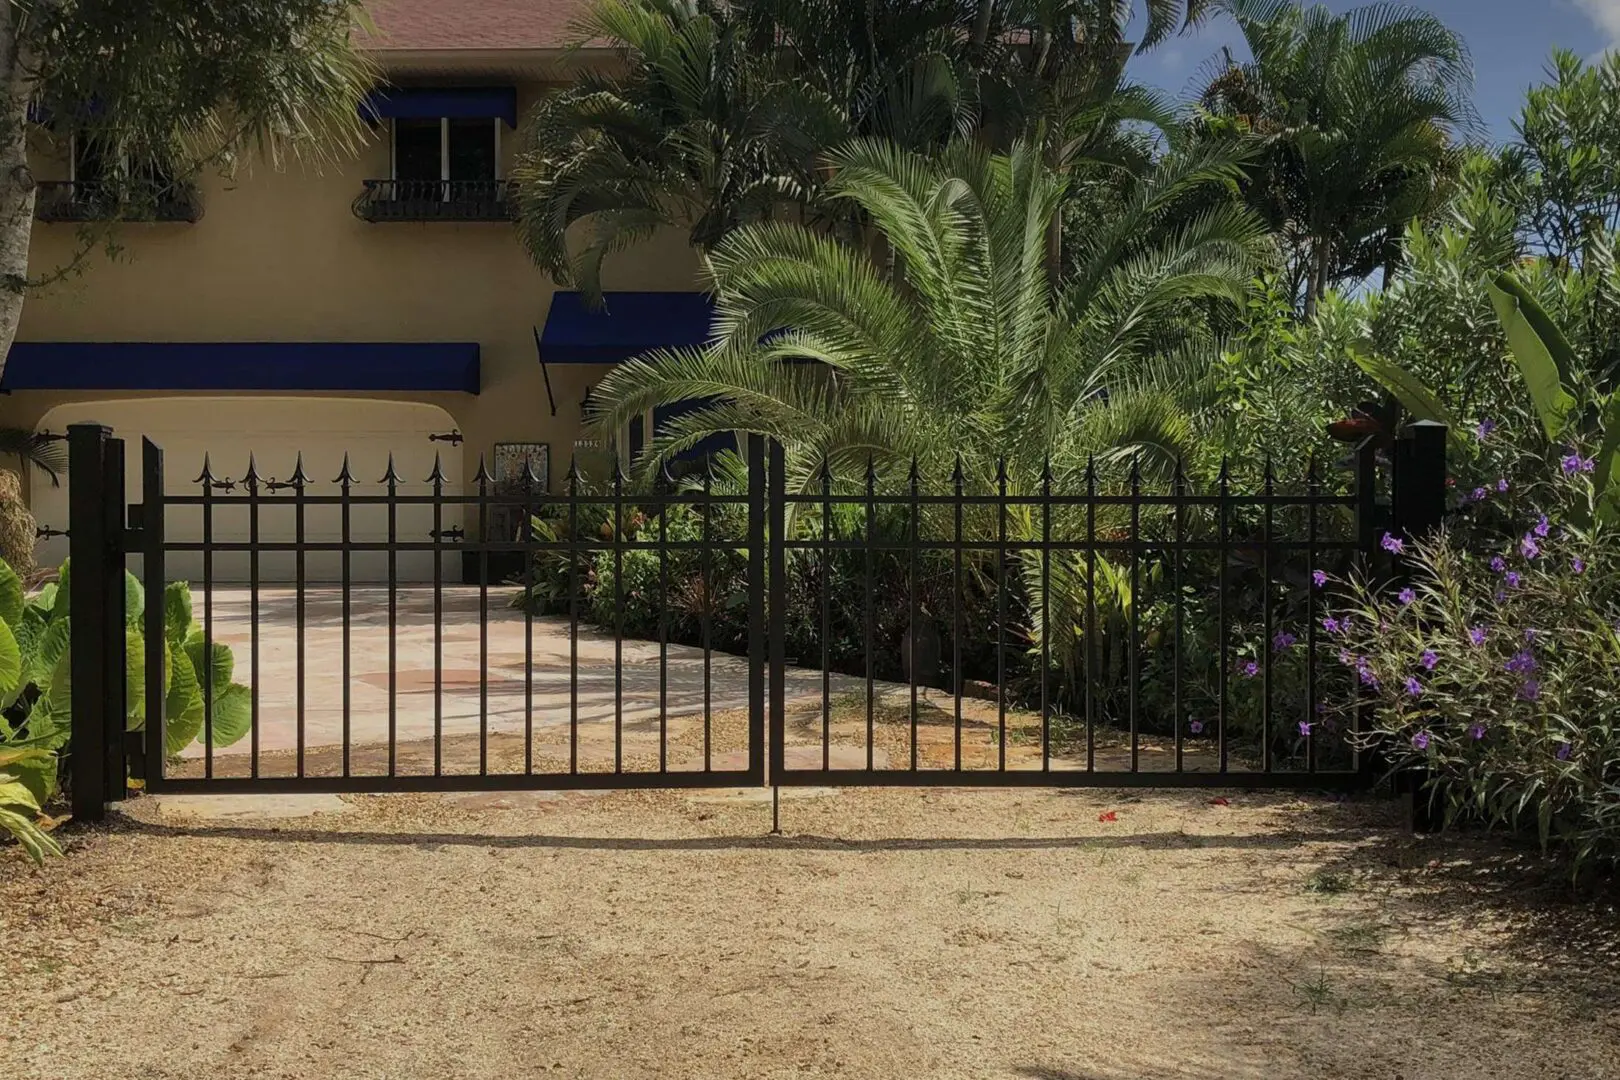 A gated driveway with palm trees and a house in the background.